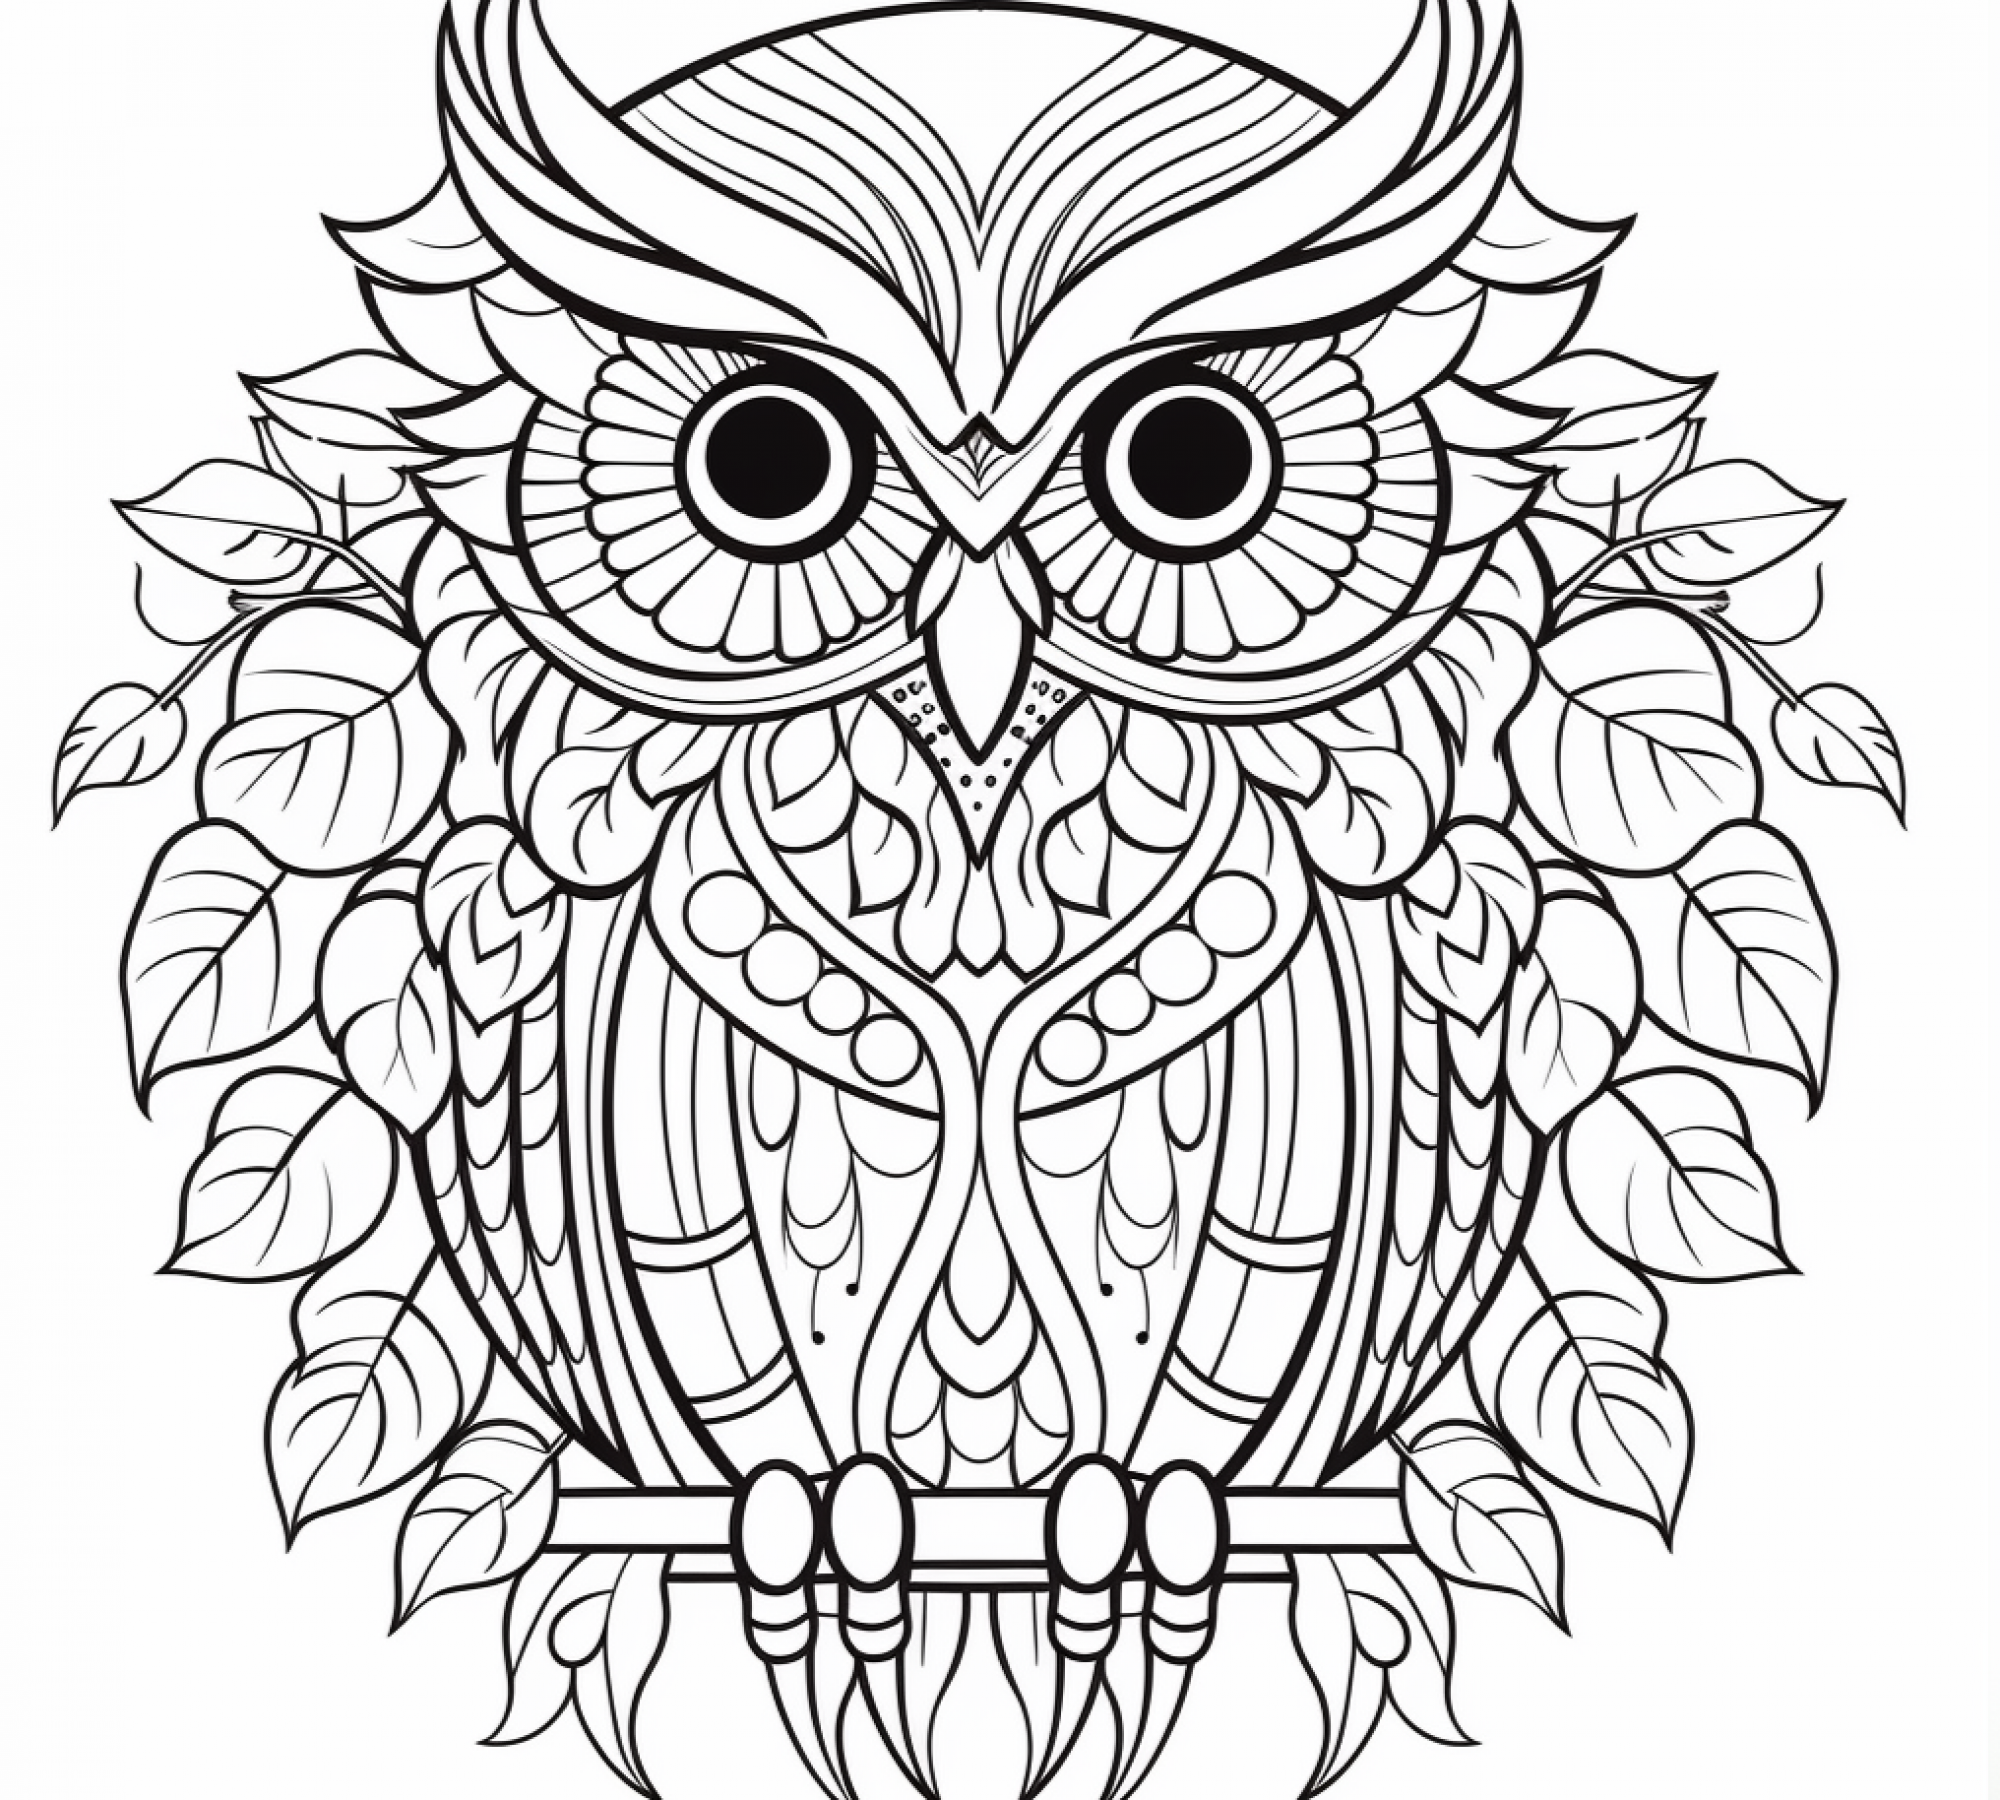 Free printable coloring page of Owl